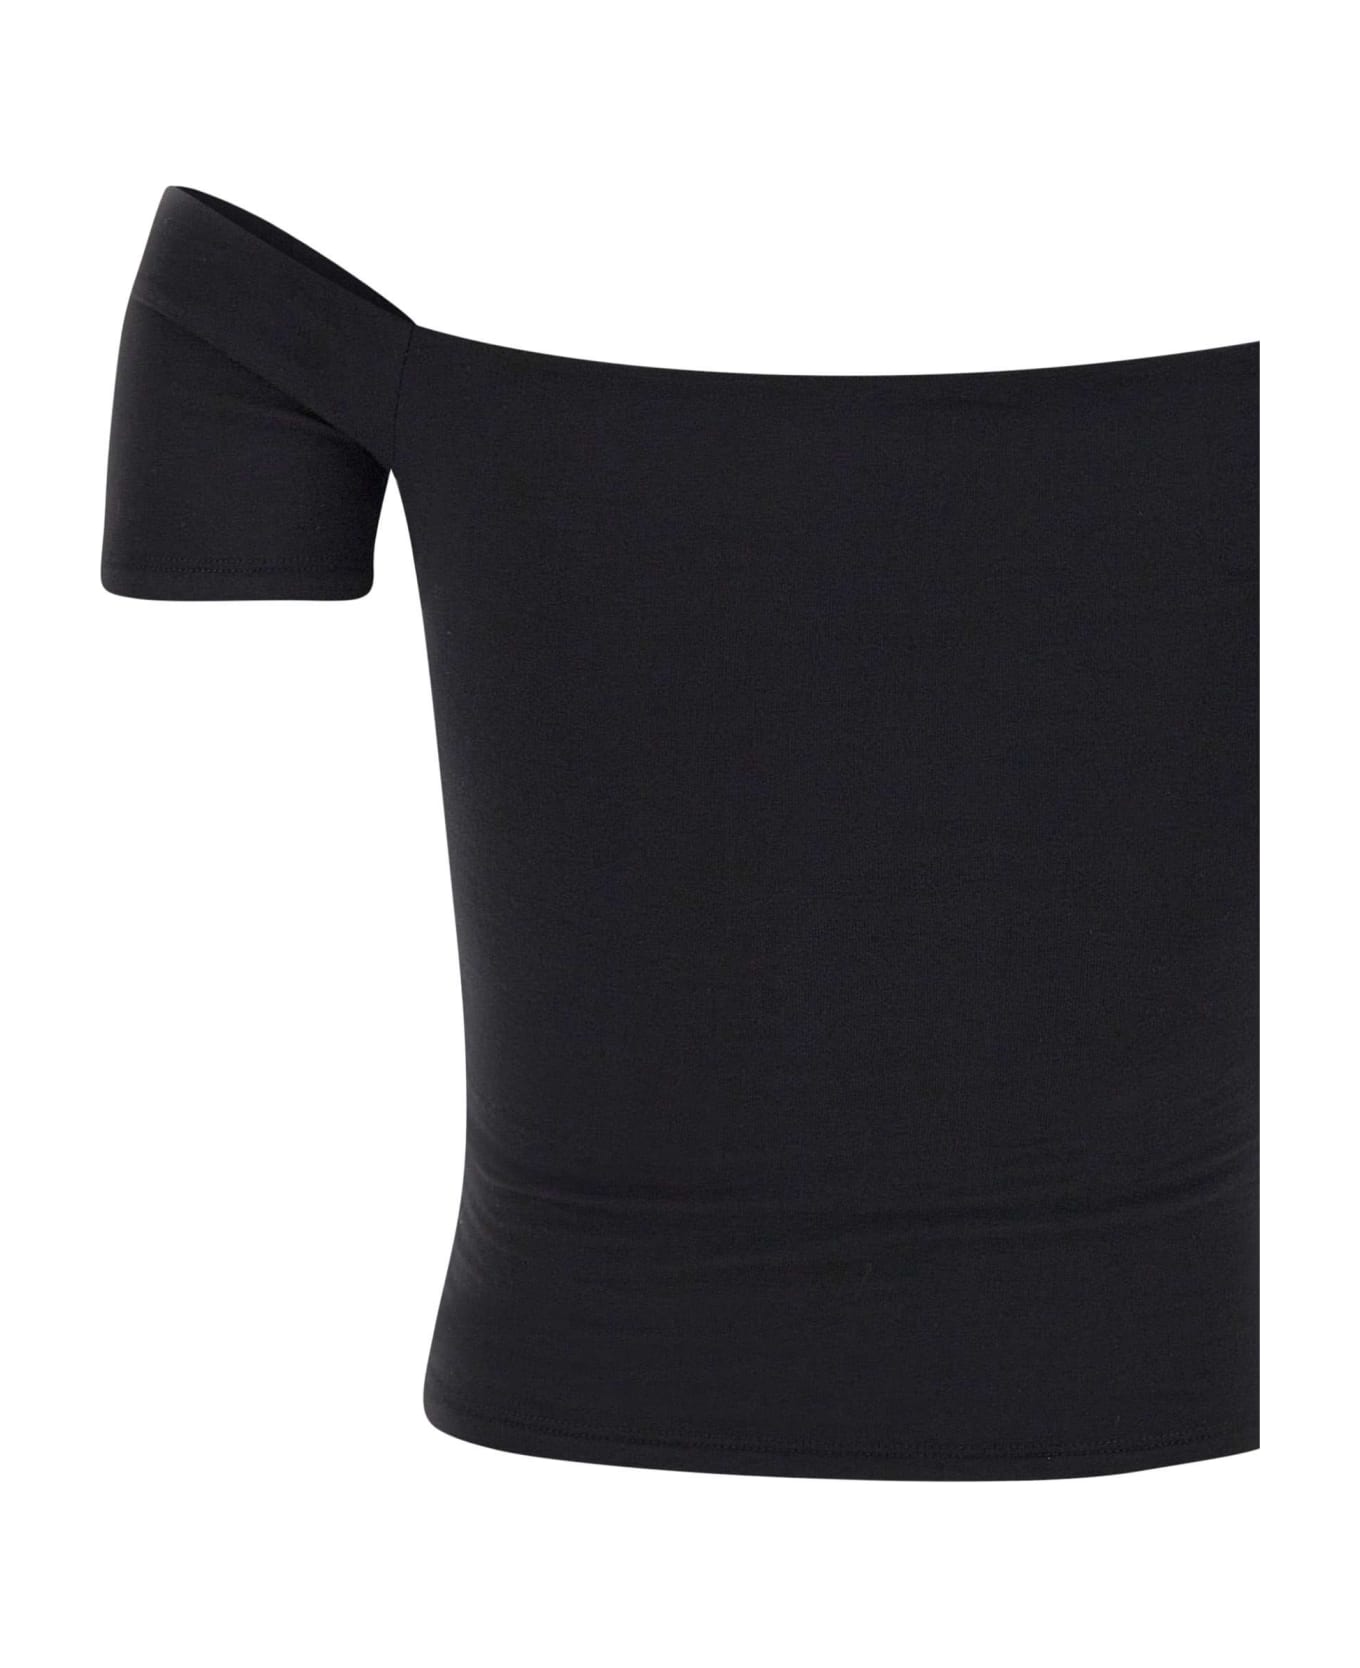 Rotate by Birger Christensen "logo Off" Cotton And Modal Top - BLACK